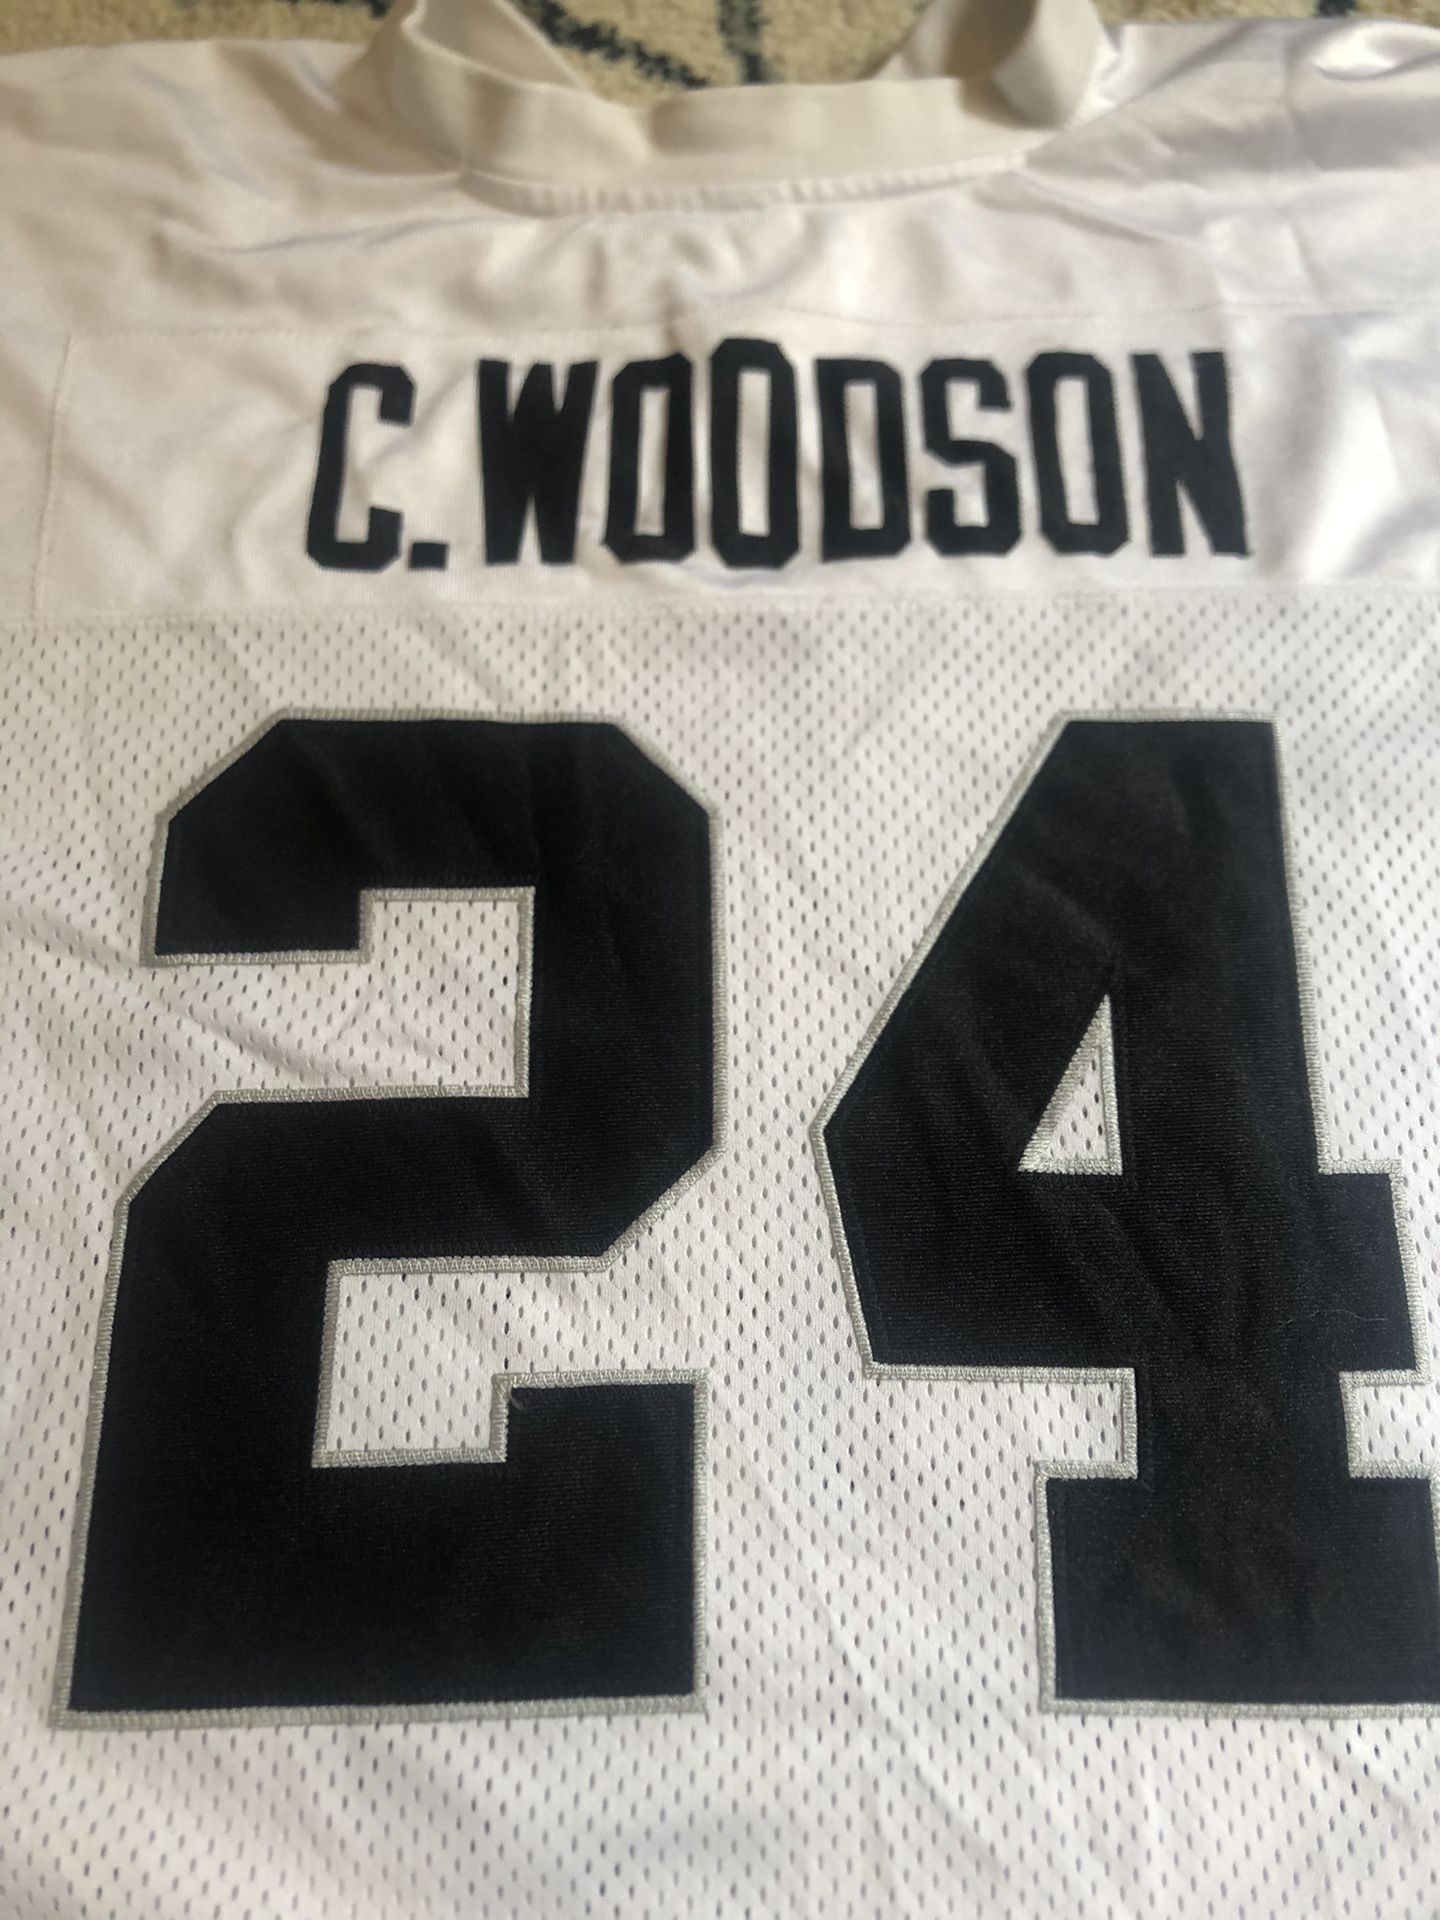 Official NFL Oakland Raiders Jersey #24 C. Woodson